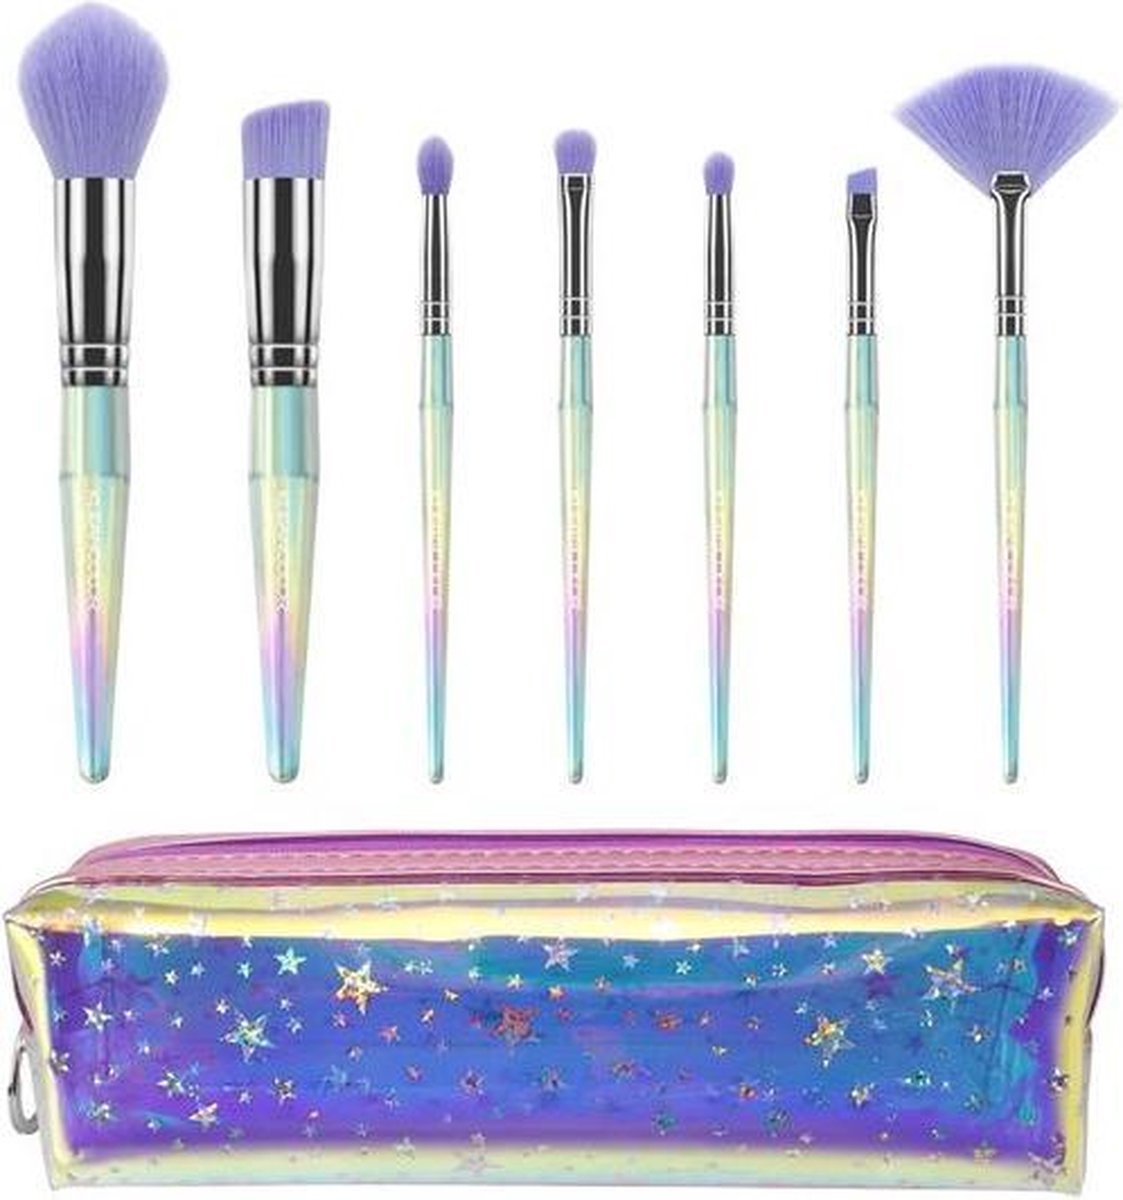 Kleancolor Star Life - 7 Piece Brush Set With Cosmetic Bag - CBS7 - Make-up kwastenset